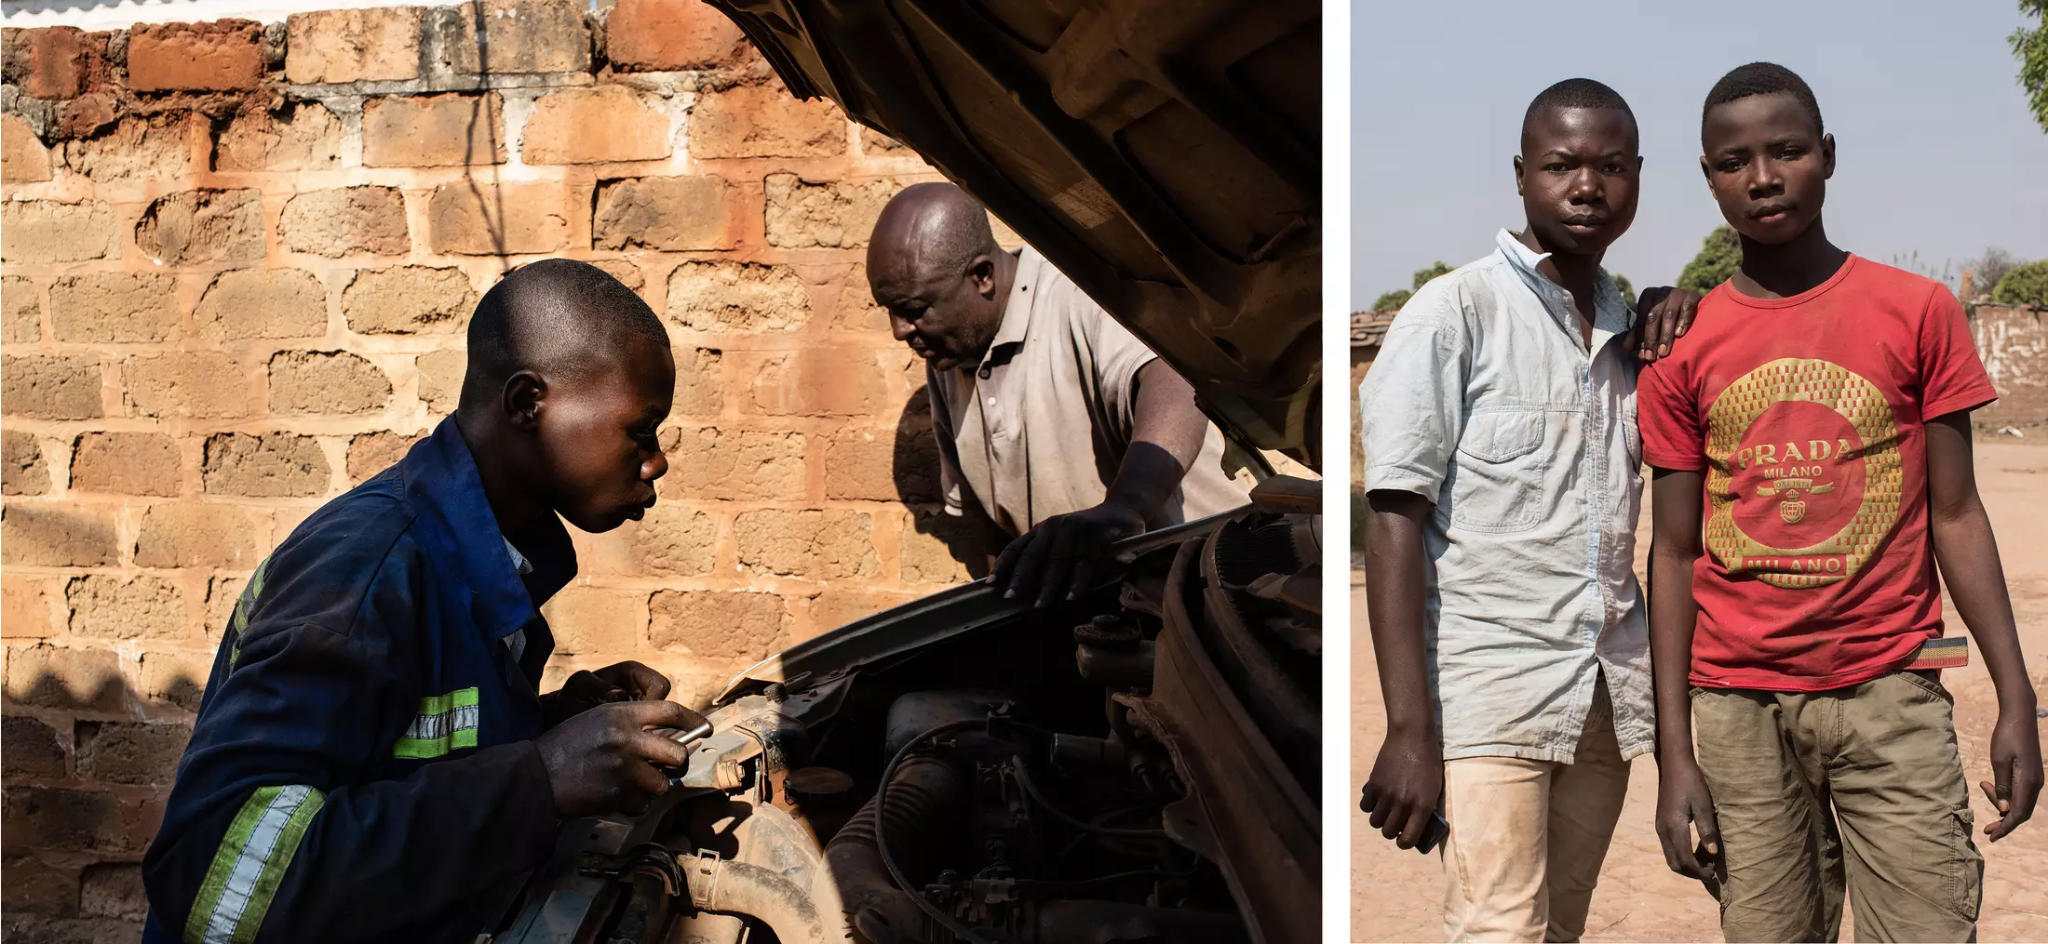 Left: Thomas Muyamba, 16, works on a car engine with Vincent Kalangi, his teacher. Muyamba used to mine cobalt but is now in an Apple-funded apprenticeship program. Right: Muyamba, in button-down shirt, with his friend Lukasa, 15, who rises before dawn six days a week to work in the cobalt mines. Image by Sebastian Meyer. Democratic Republic of Congo, 2018.